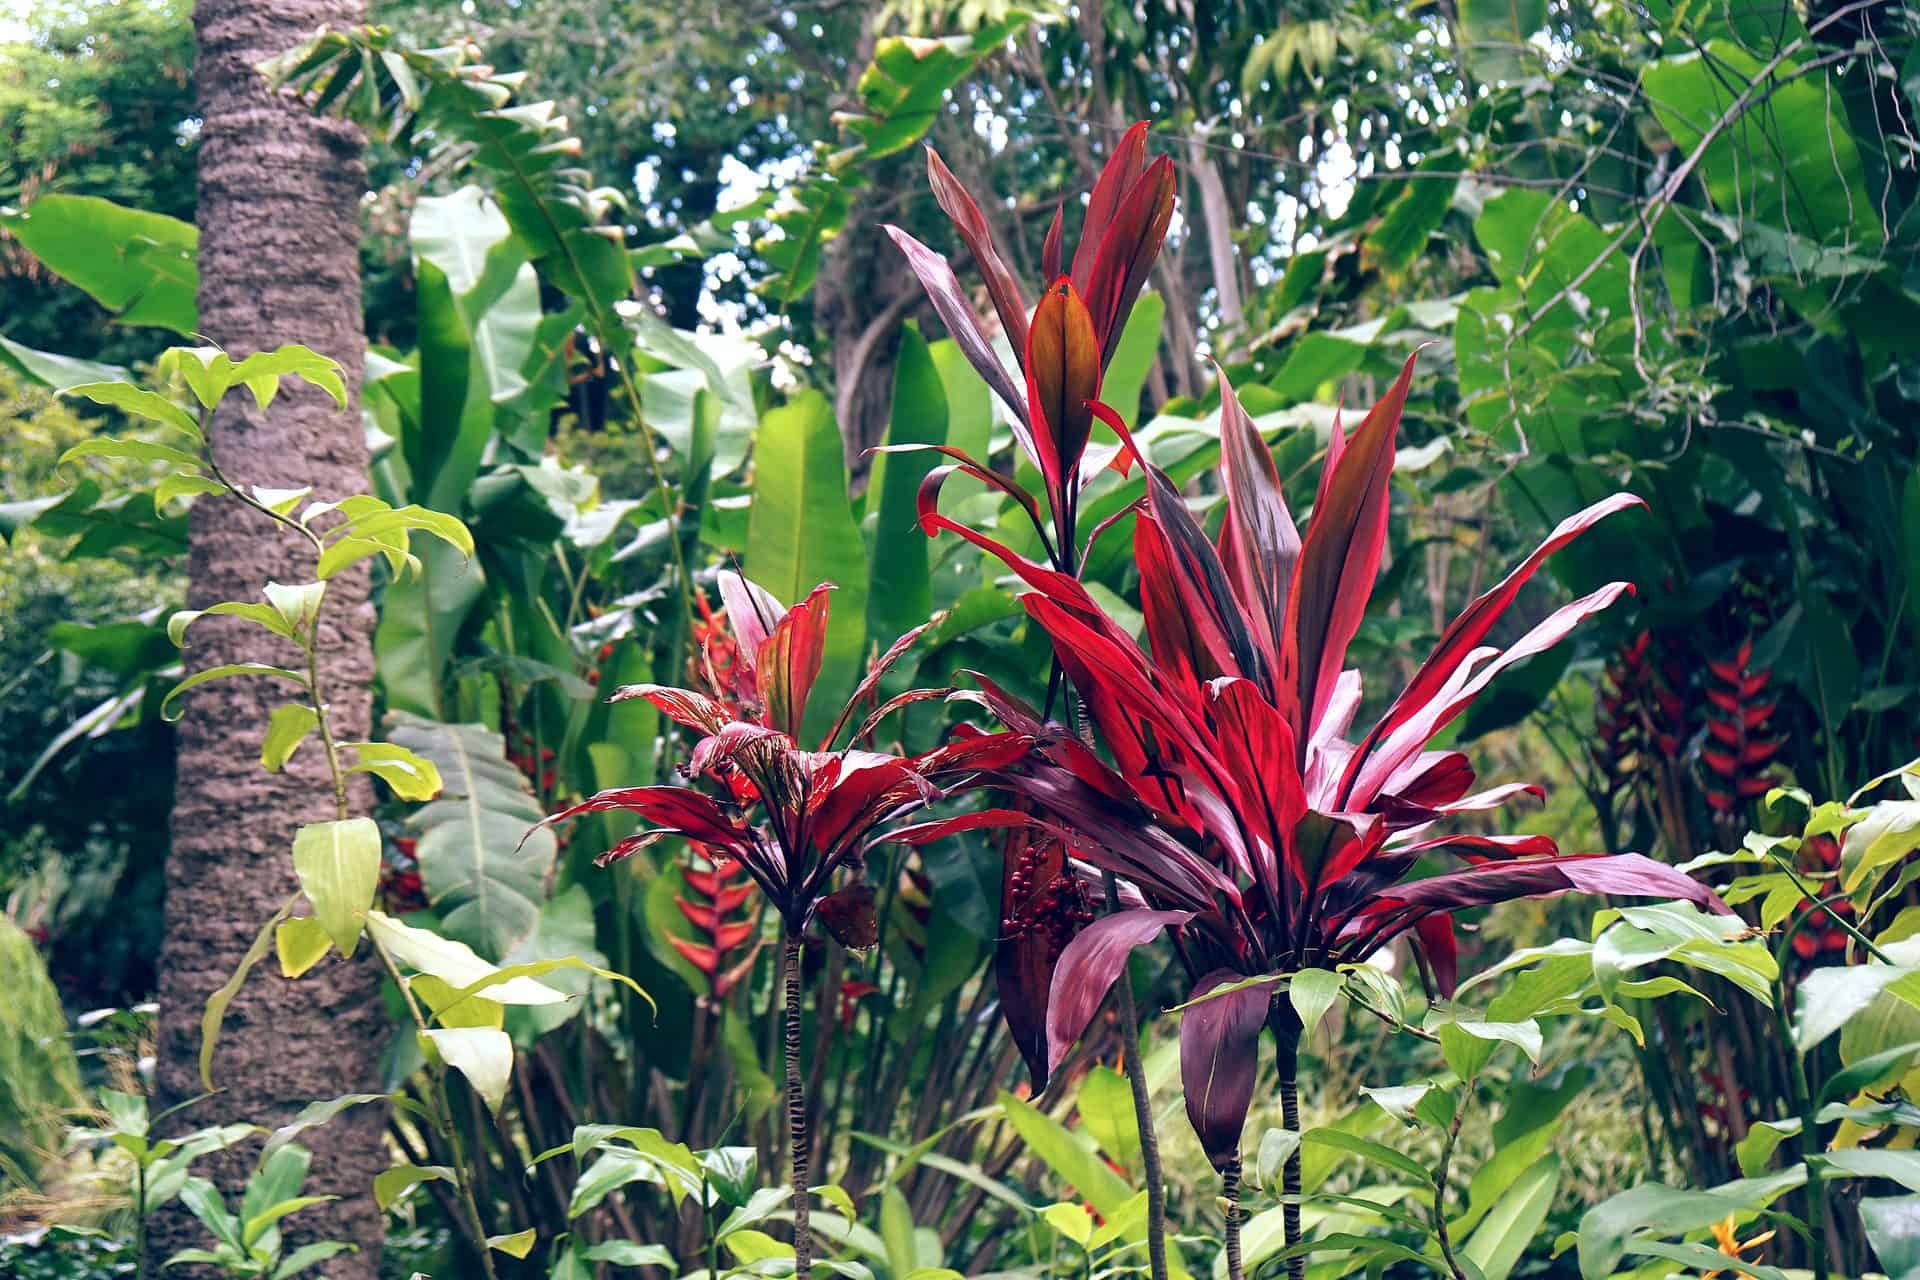 cordyline growing in a tropical area